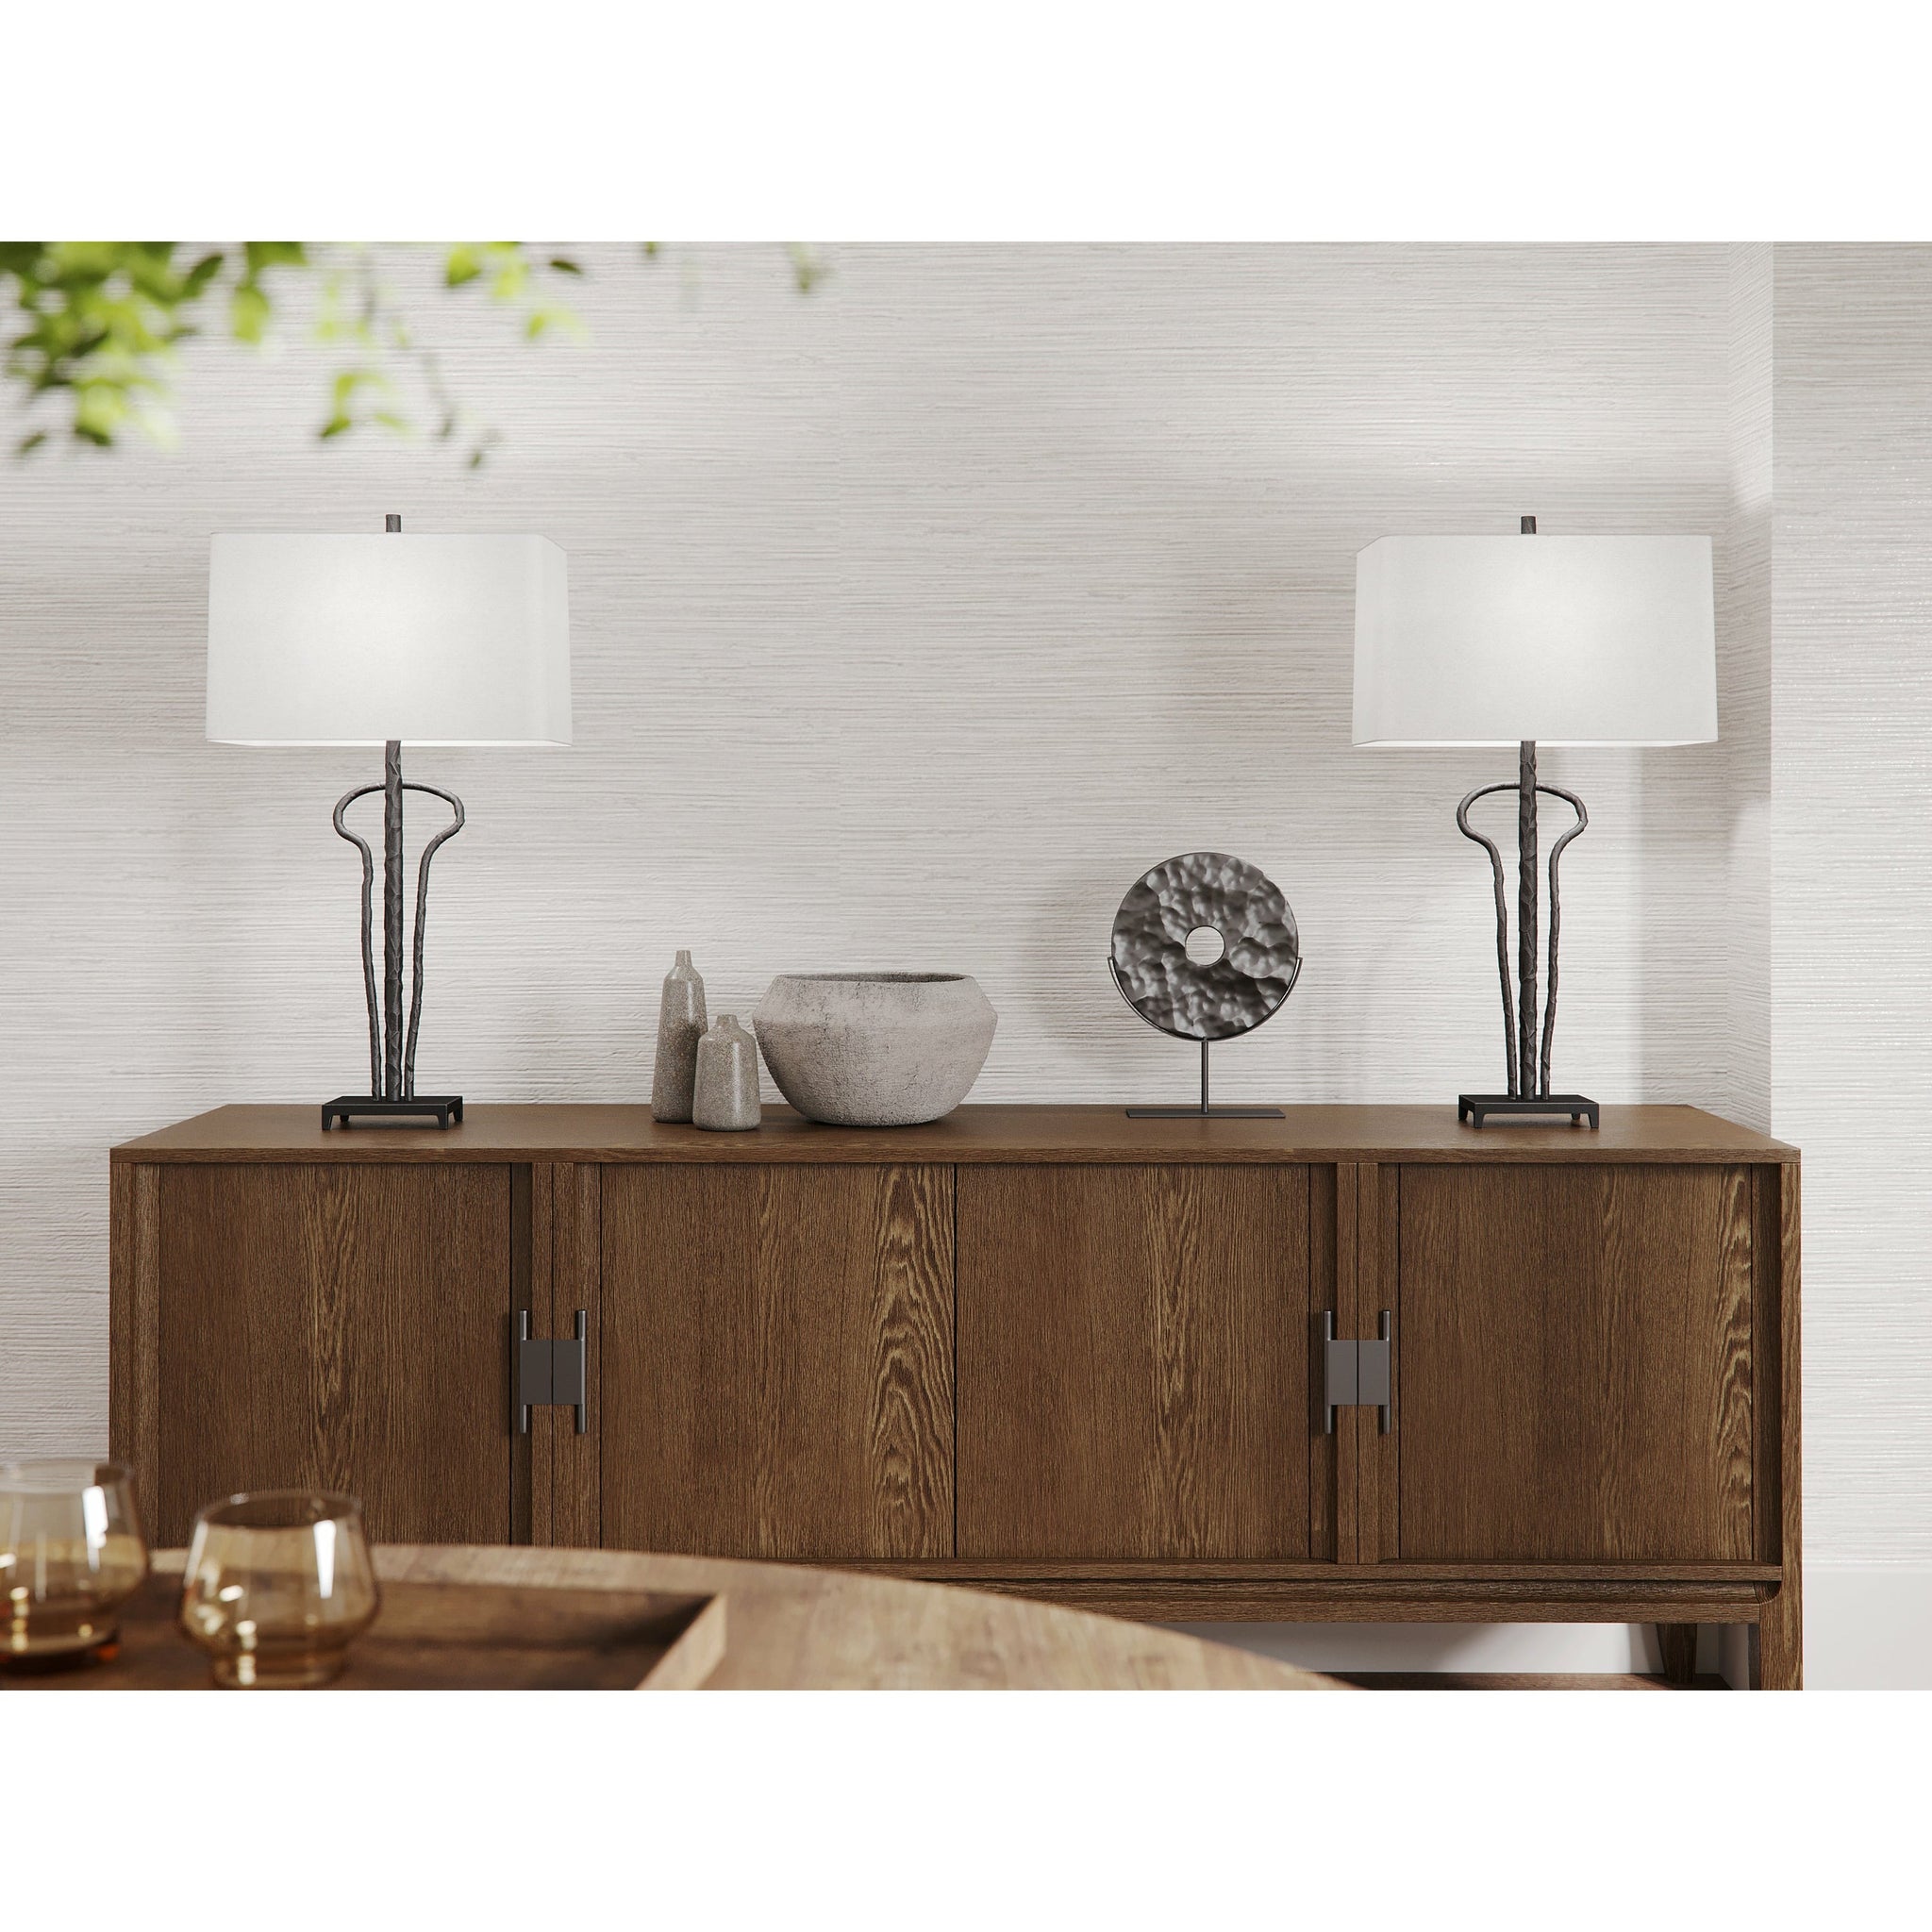 Dominic Table Lamp